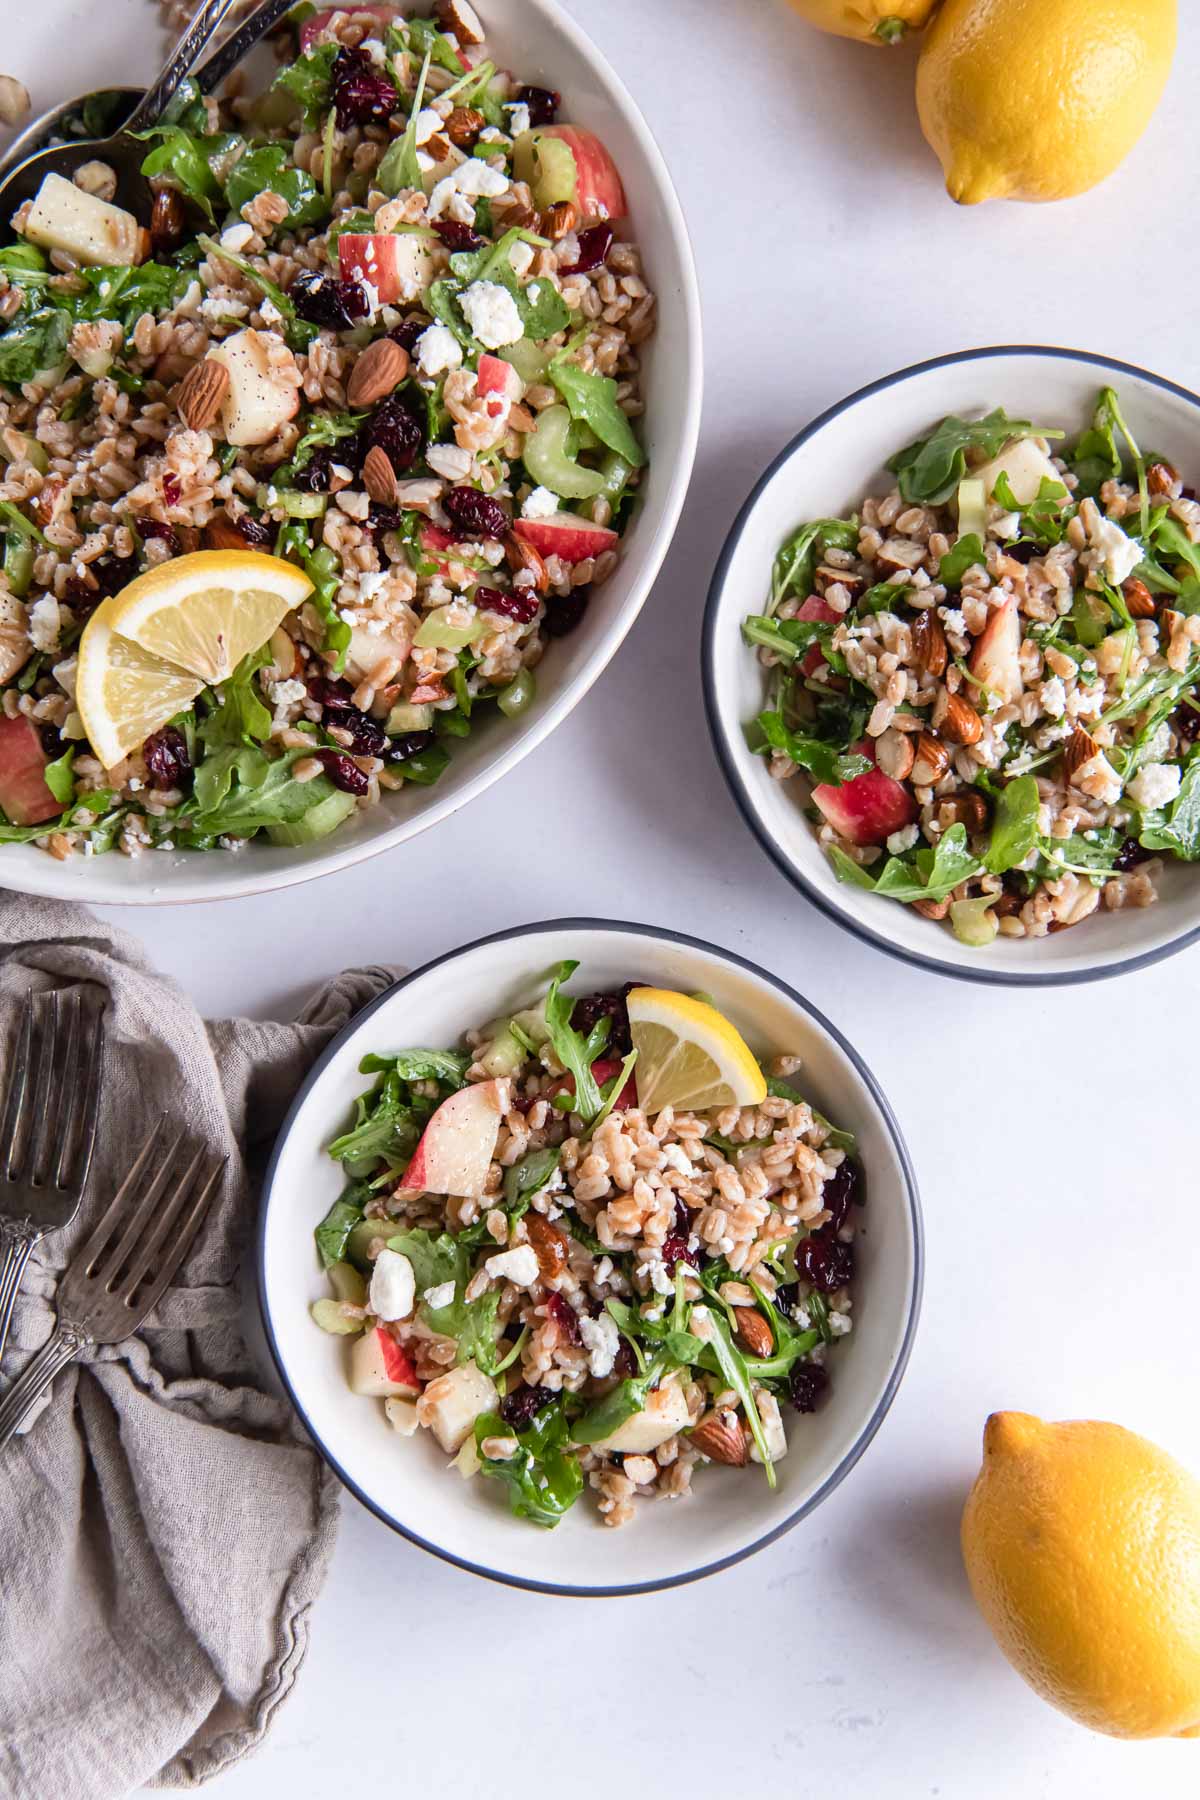 Farro salad in serving bowl and two smaller bowls.